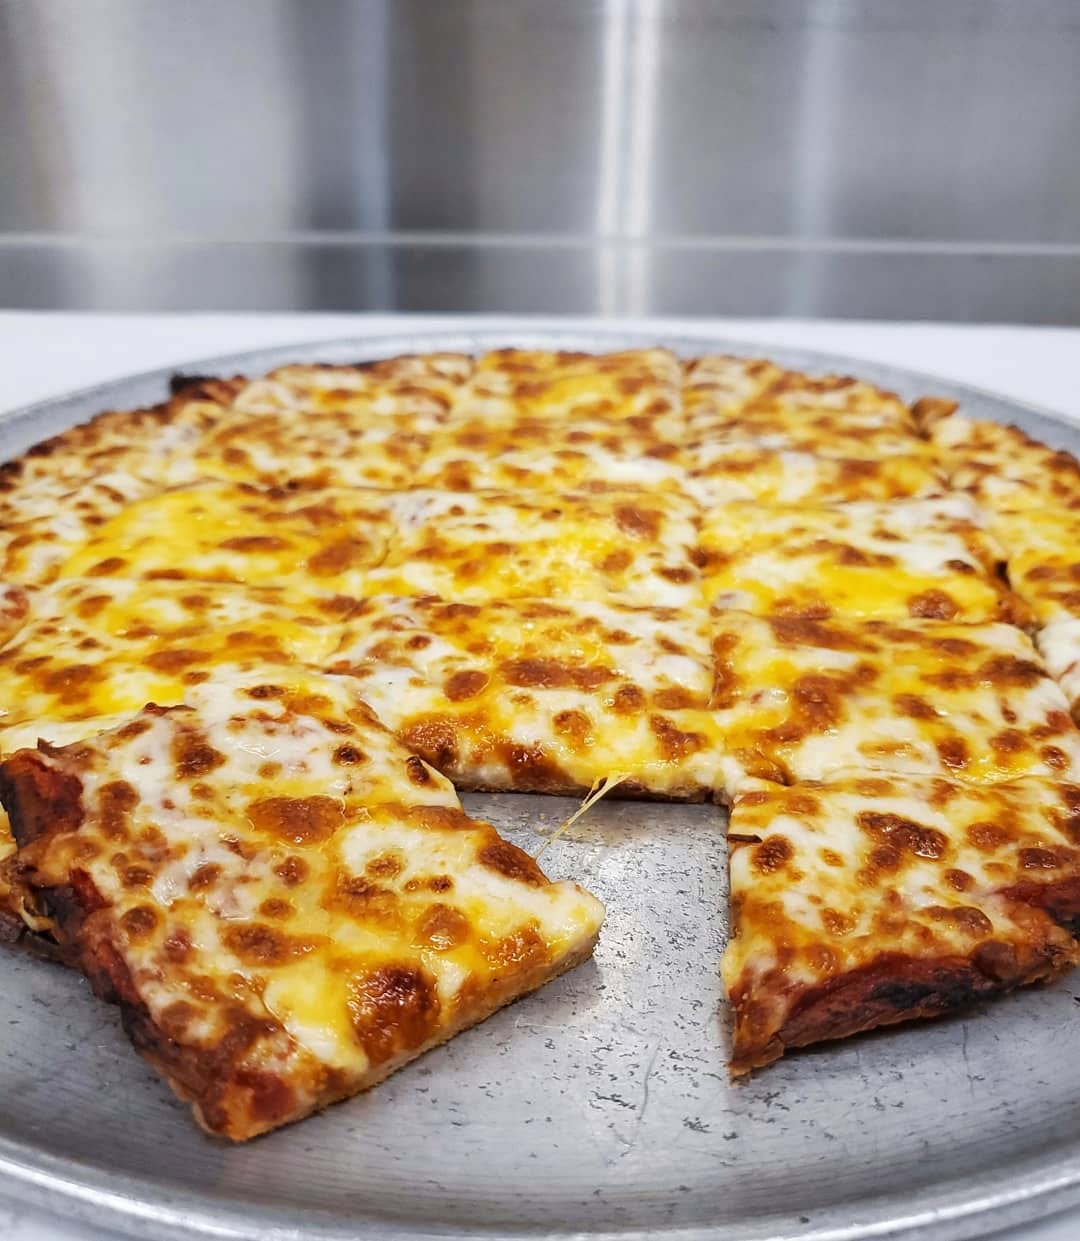 A cheese pizza from Wild River Brookings